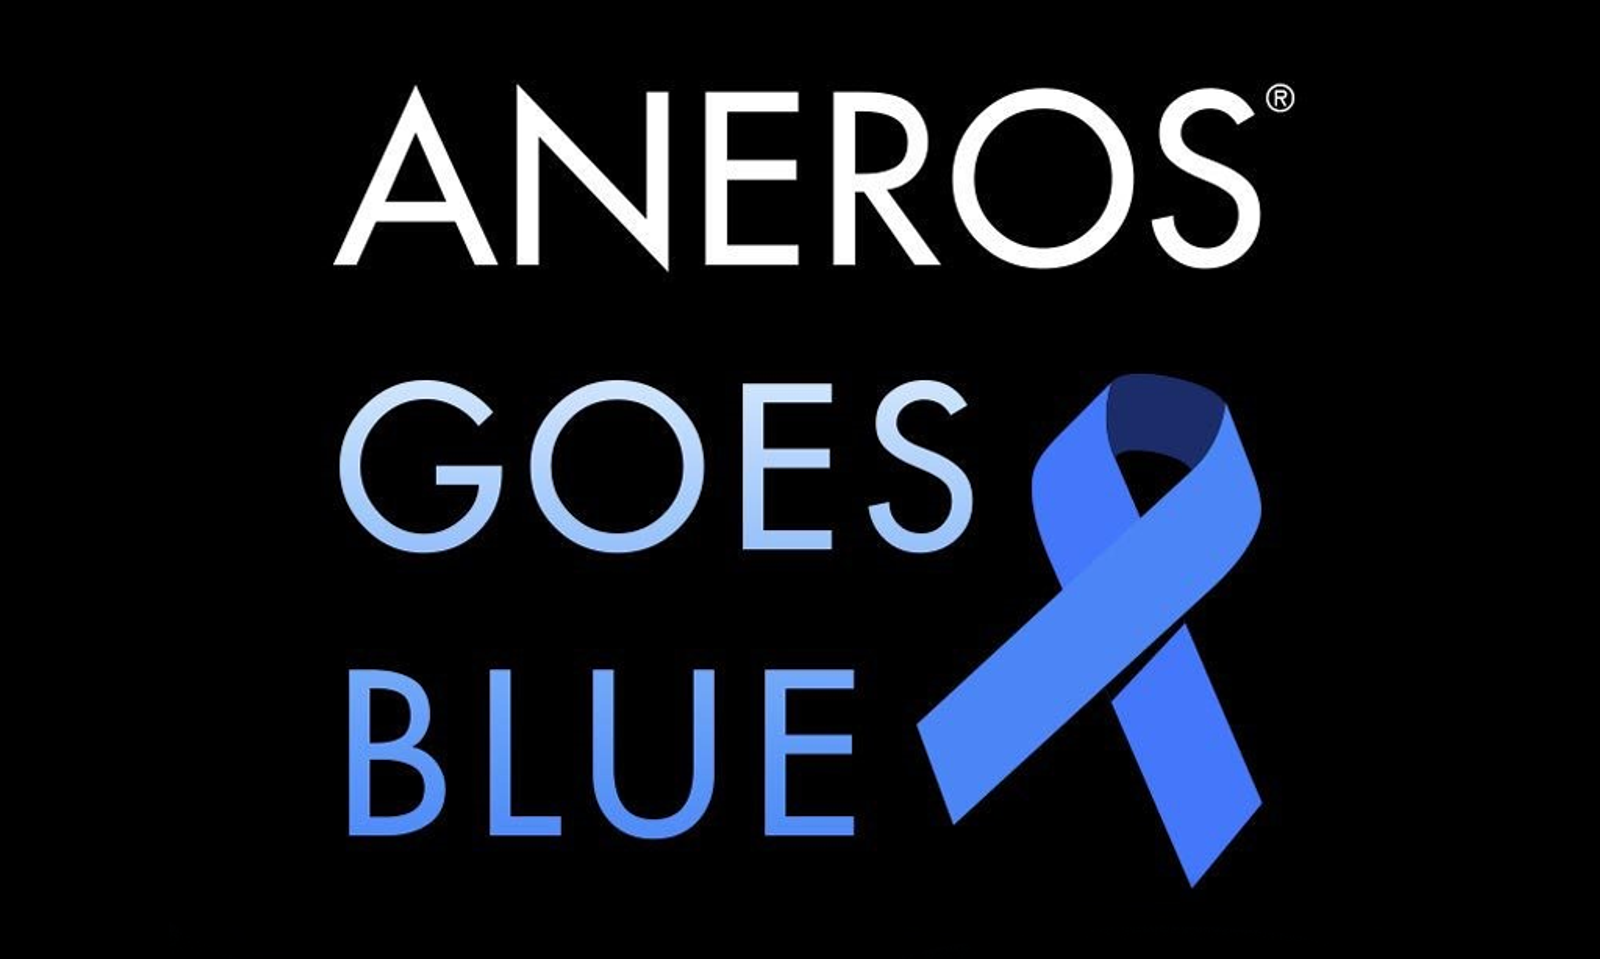 Aneros Goes Blue Retail Kits Now Shipping